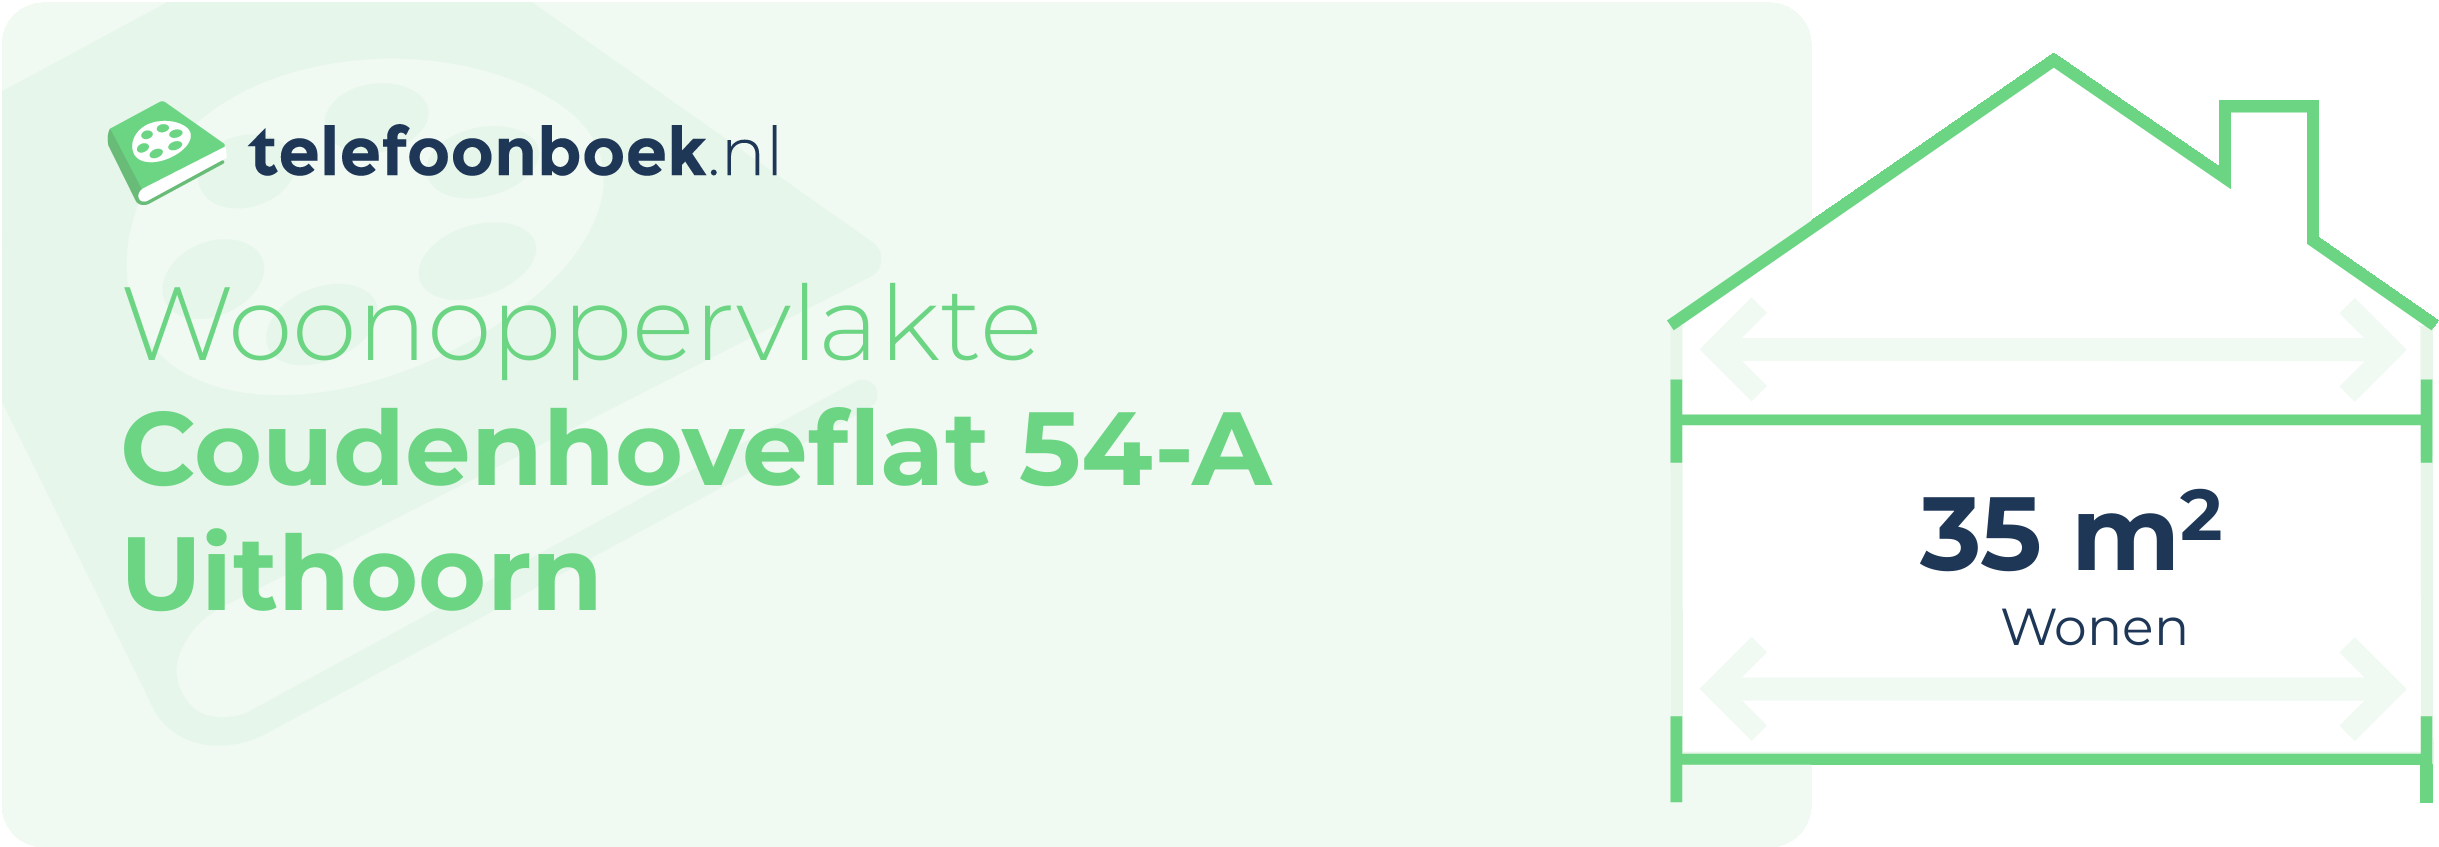 Woonoppervlakte Coudenhoveflat 54-A Uithoorn